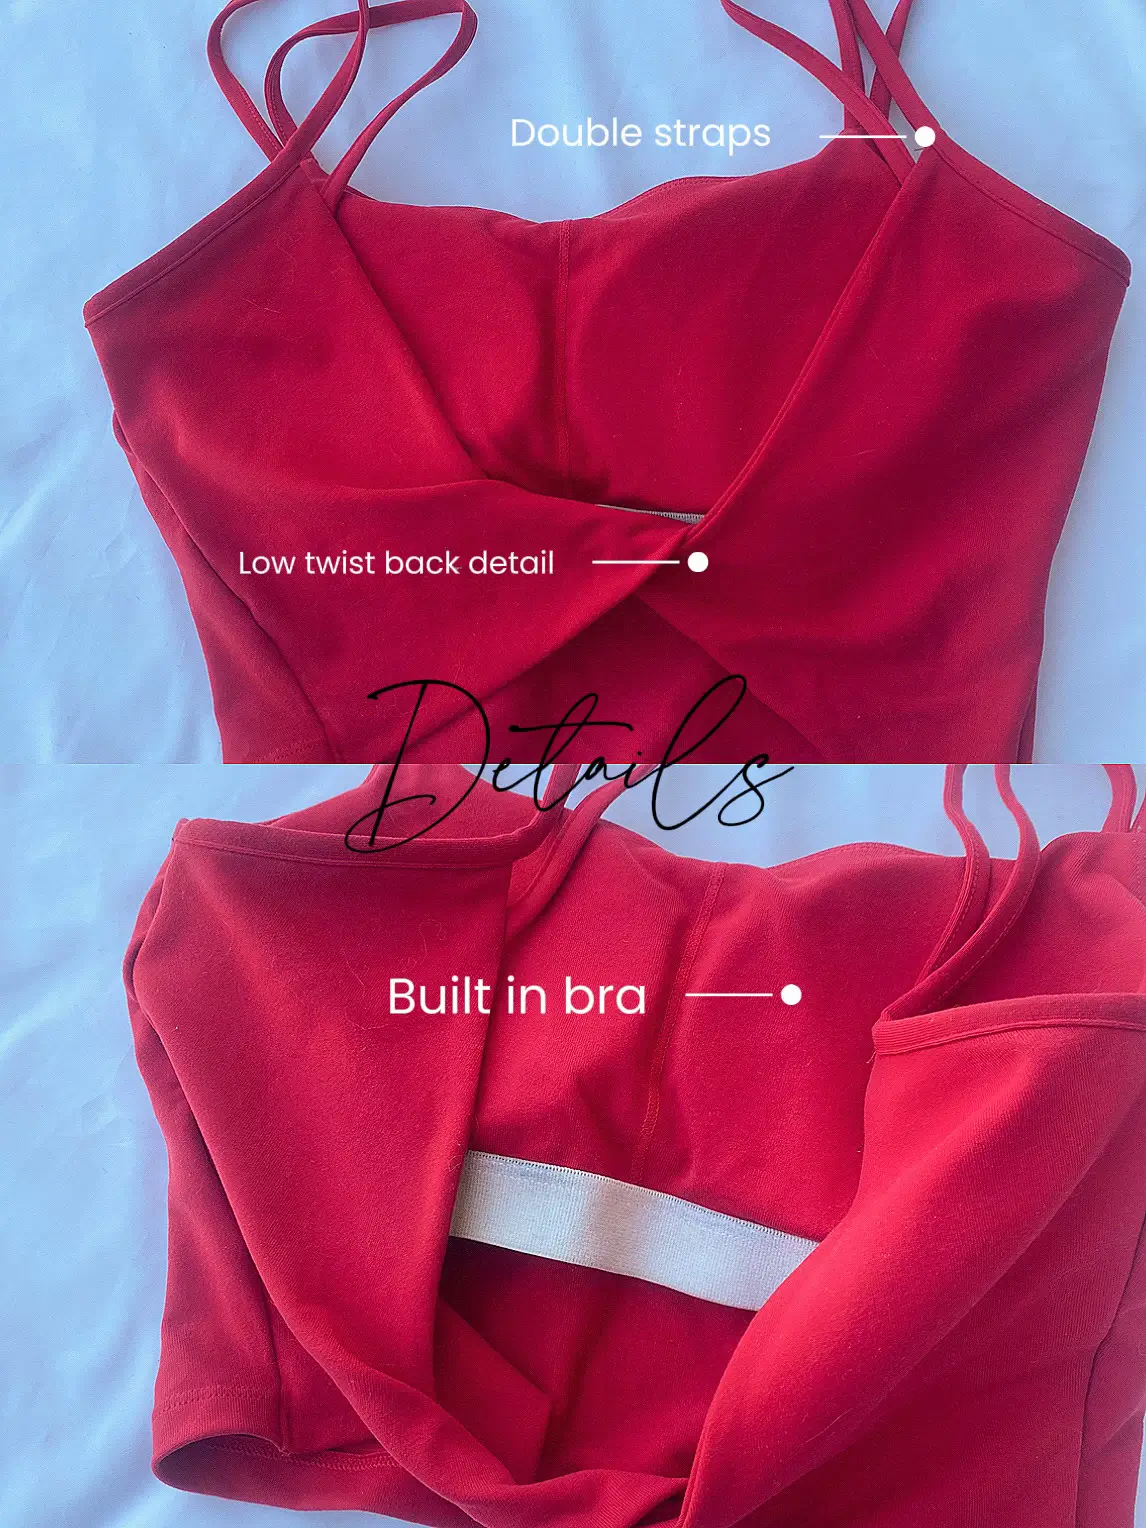 HALARA WORKOUT TOPS REVIEW, Gallery posted by Lexirosenstein